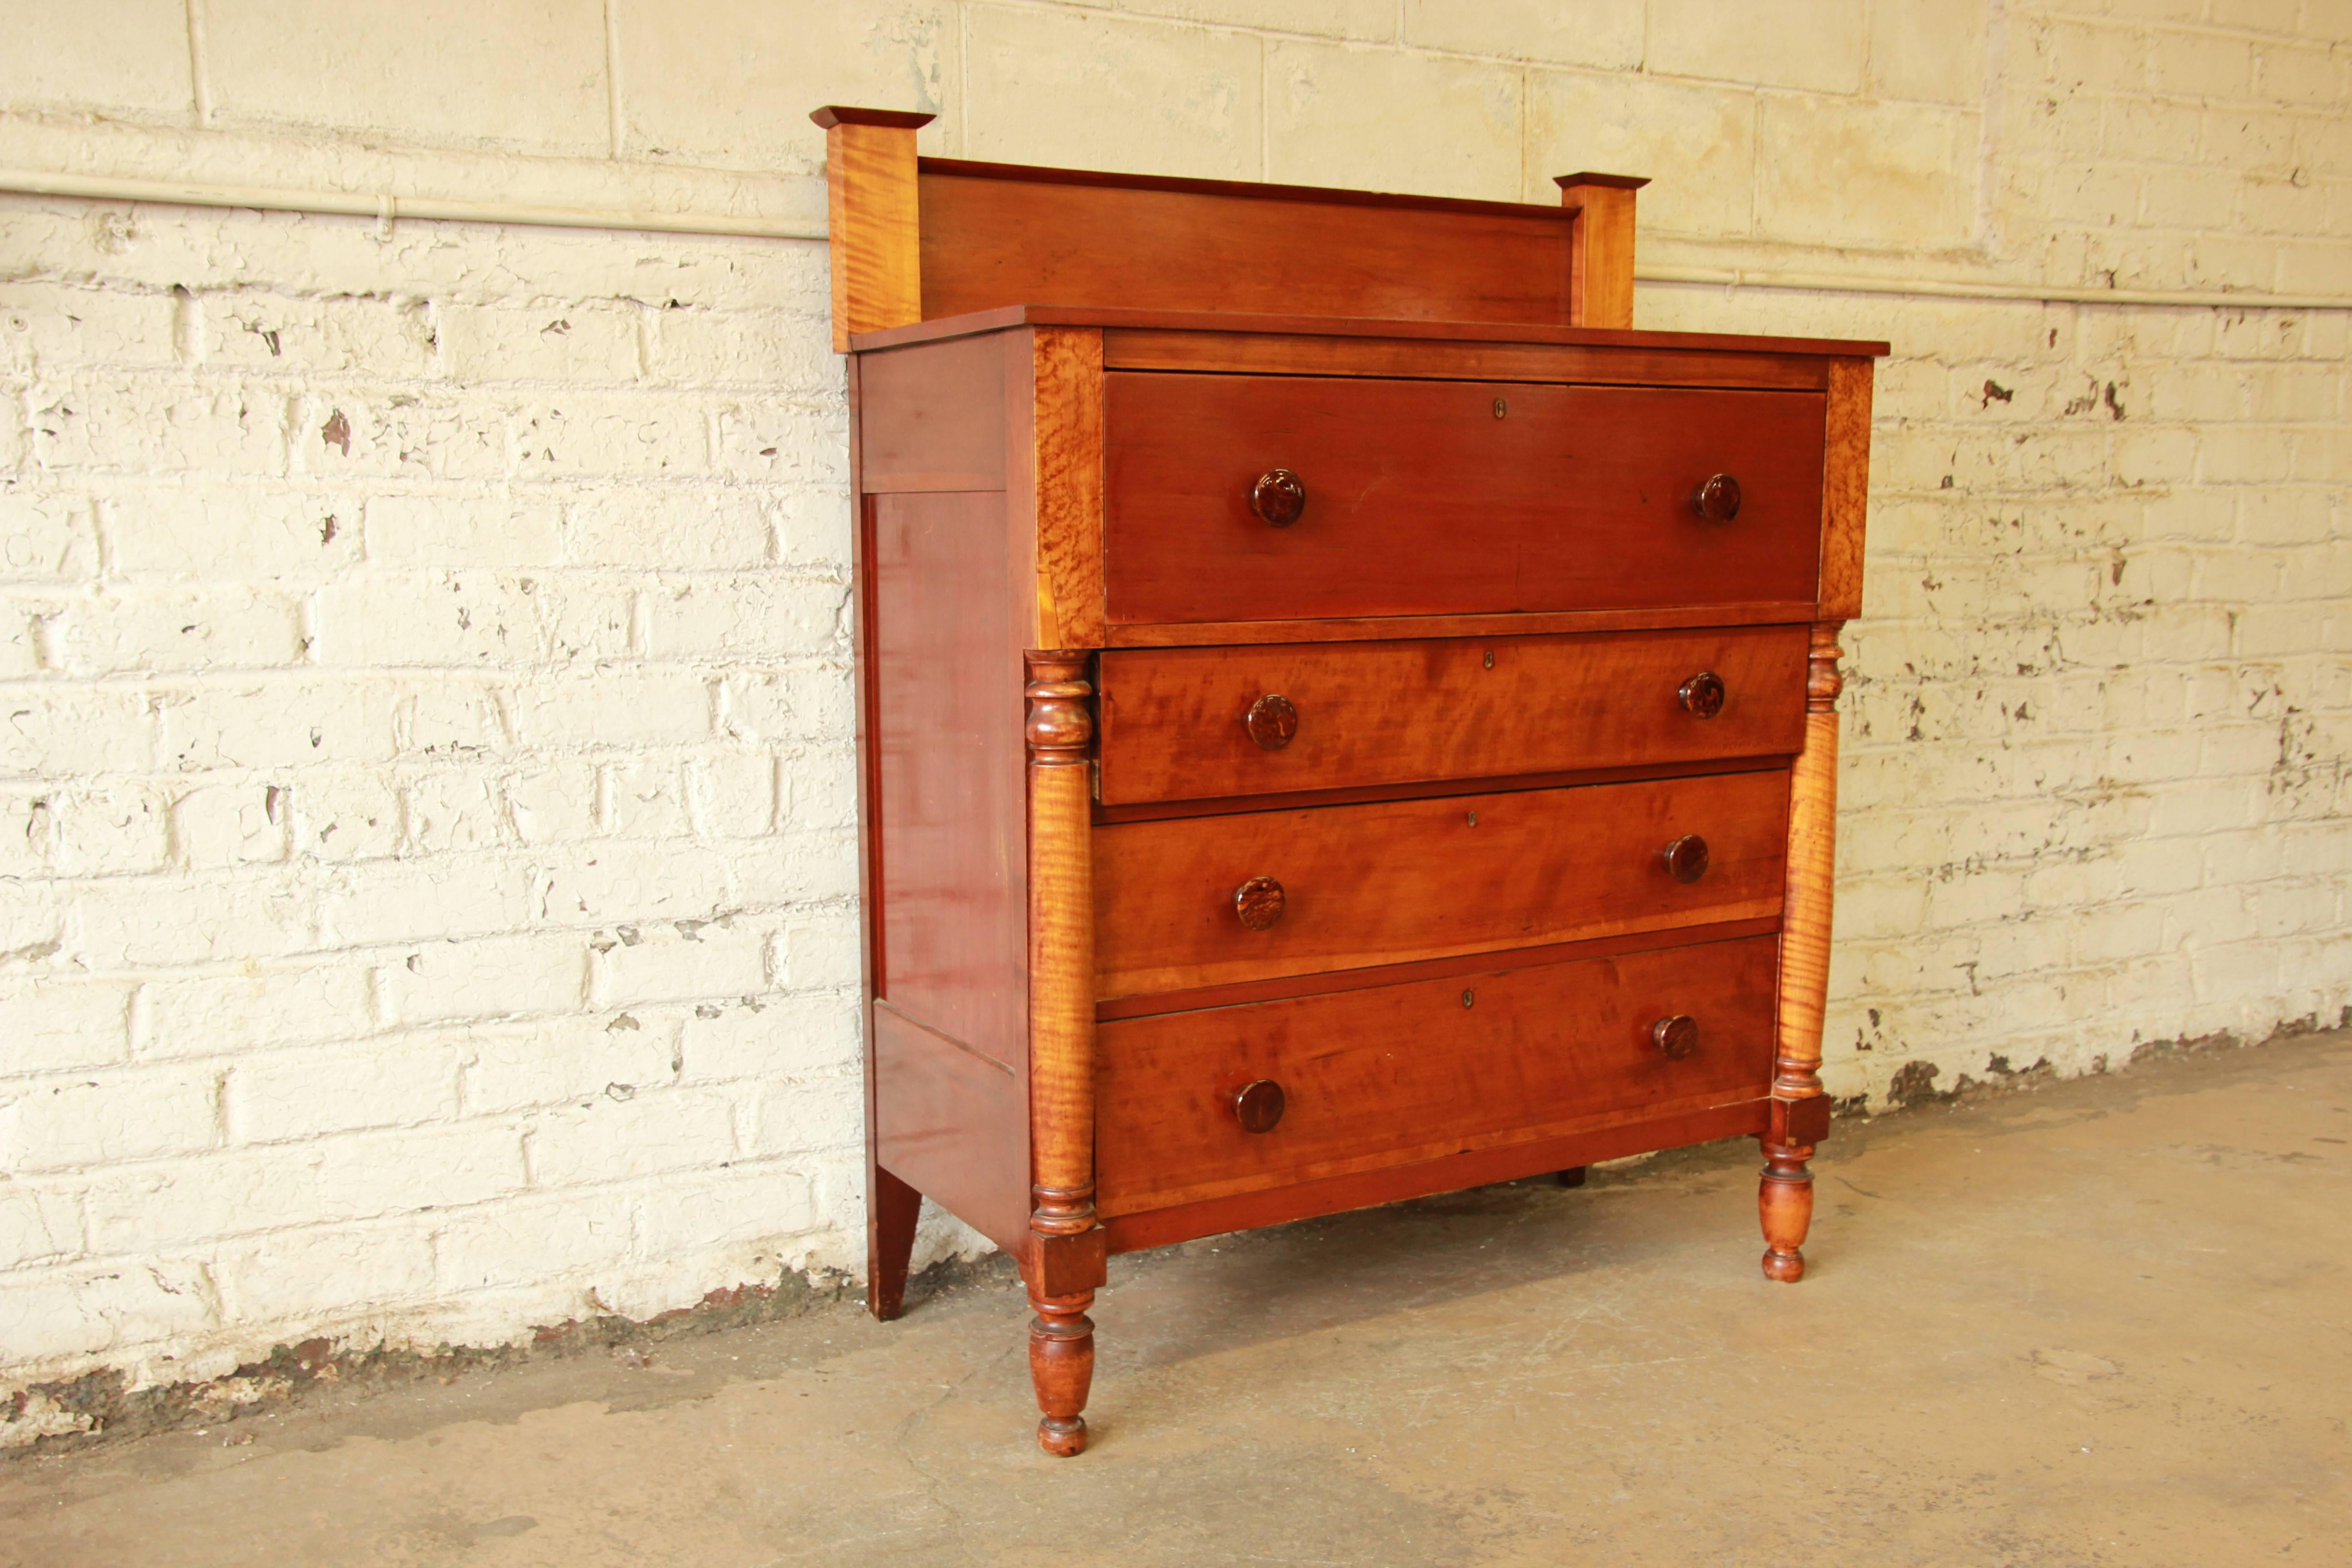 A beautiful American Sheraton four-drawer chest of drawers, circa 1820. The dresser is made from solid cherry, with gorgeous tiger maple columns. Made in the early 19th century, the dresser is very well constructed and has dovetail joints. The